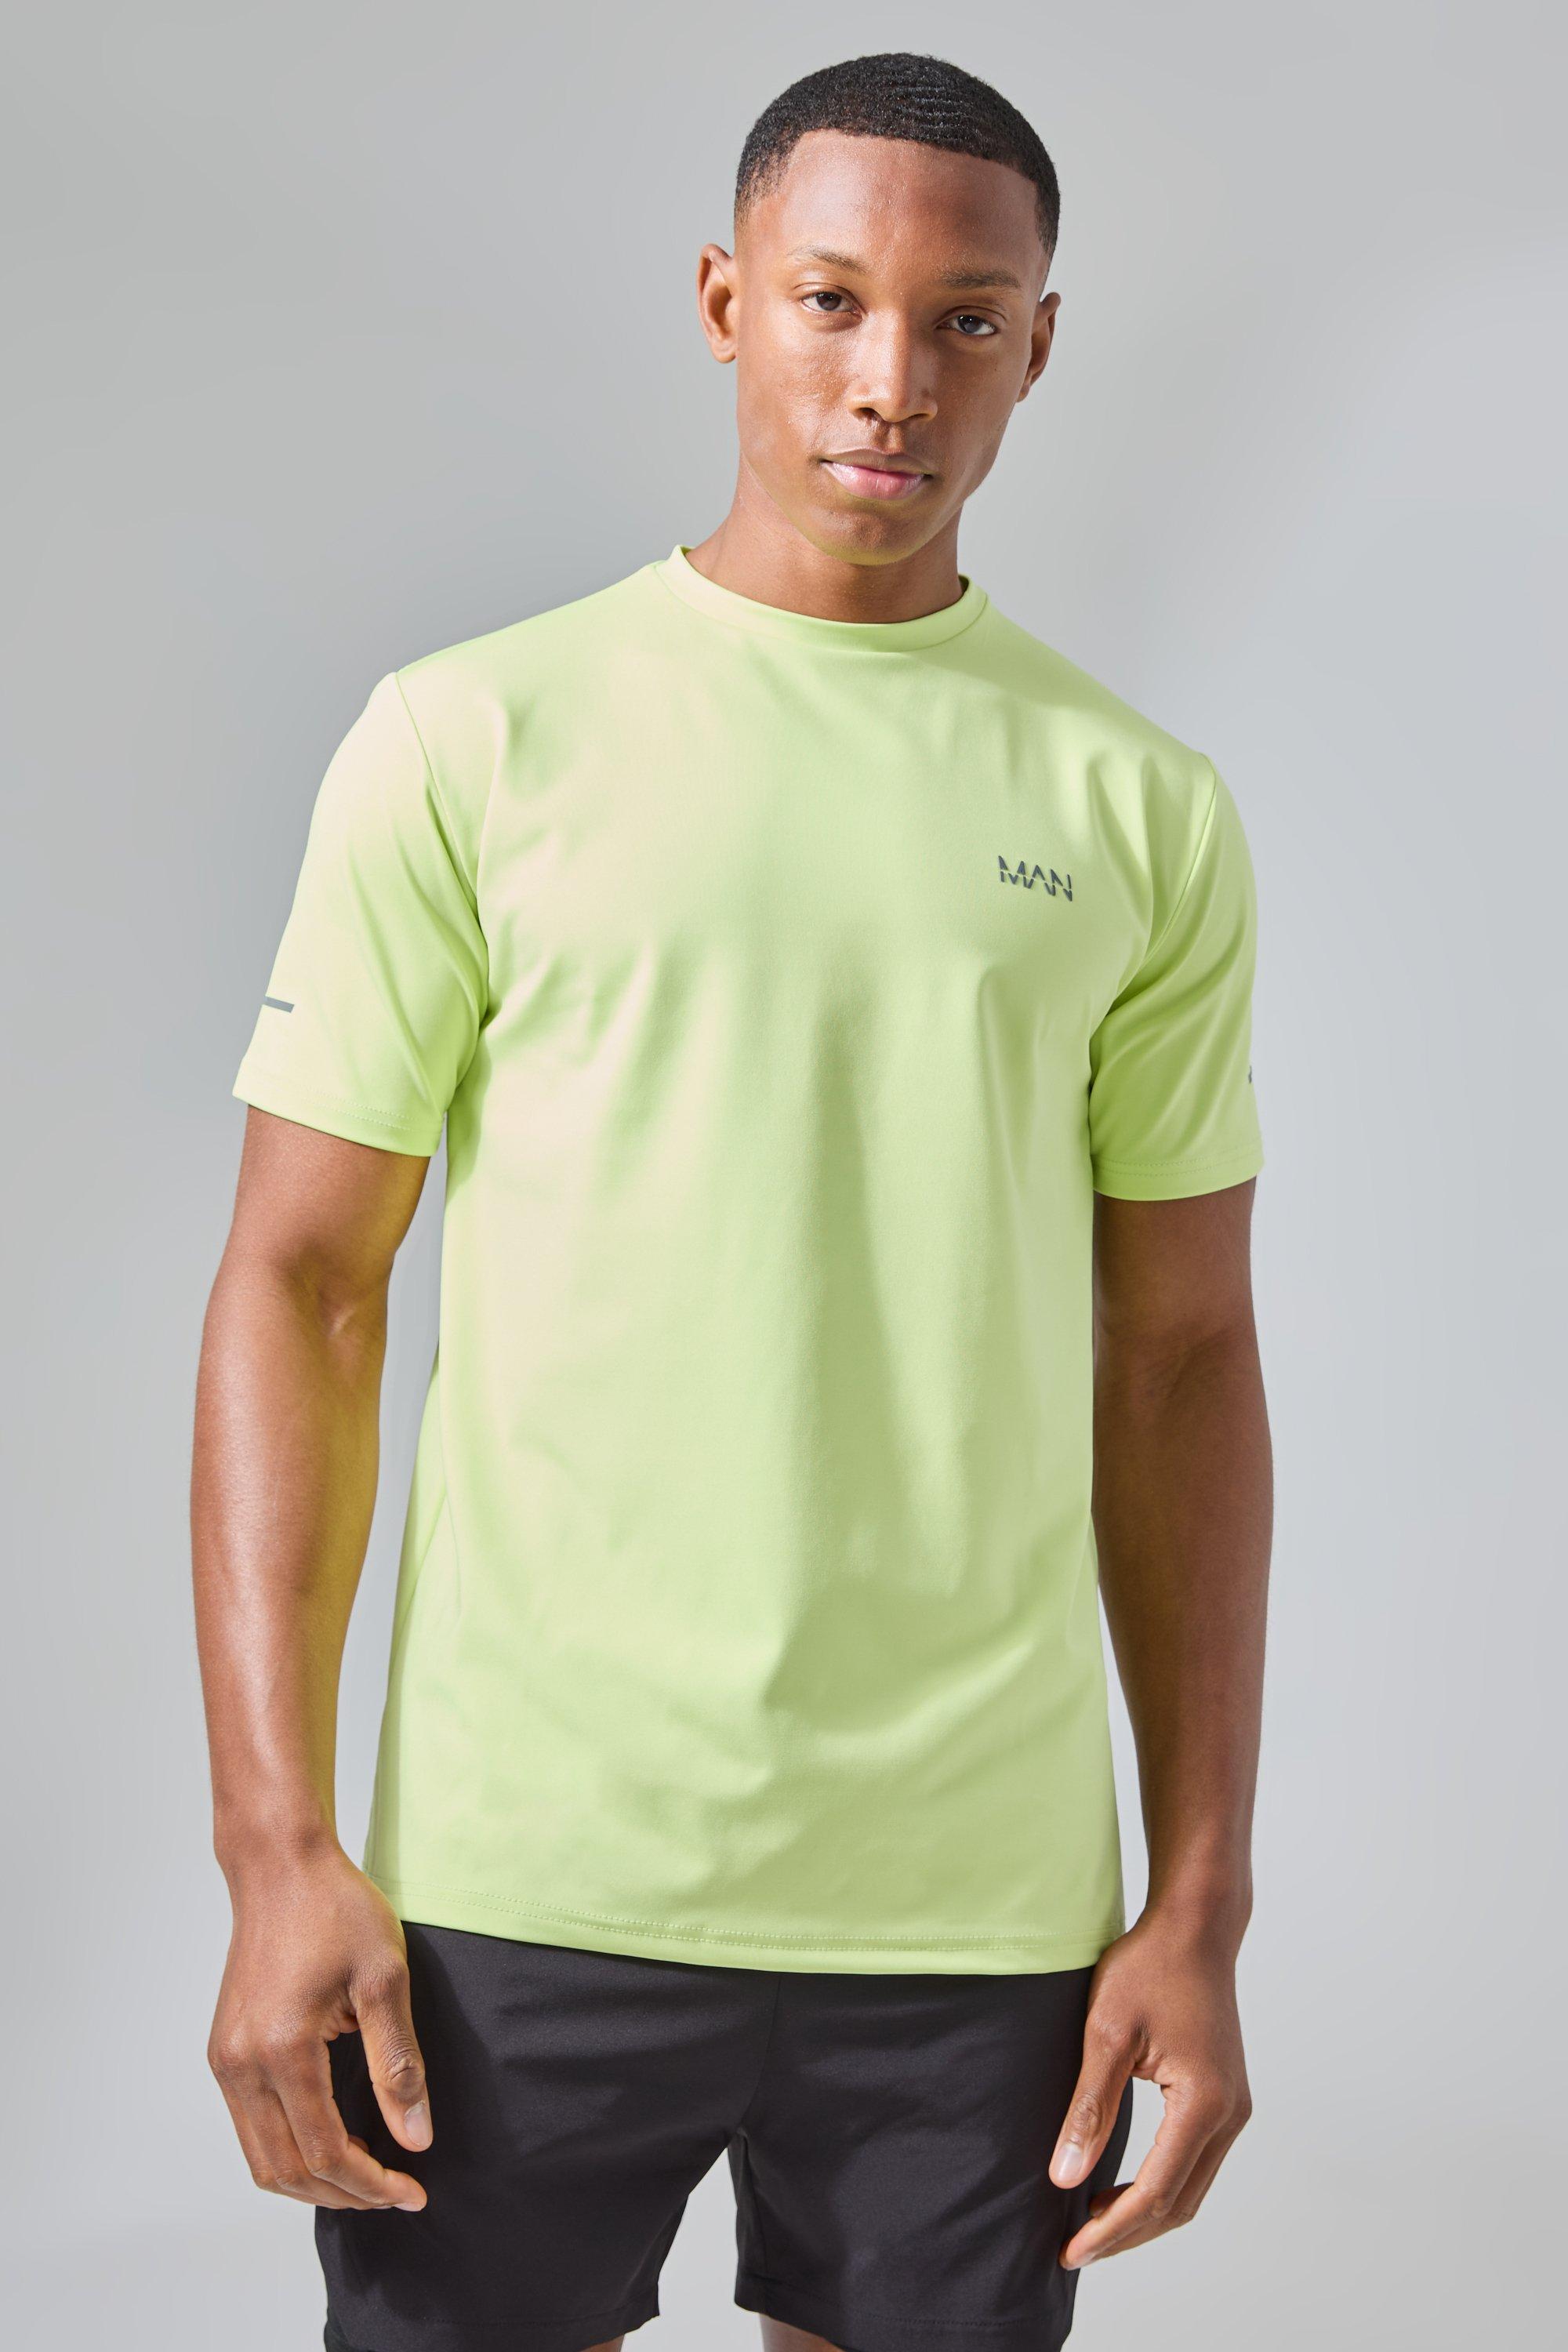 Image of Man Active Performance T-shirt, Verde